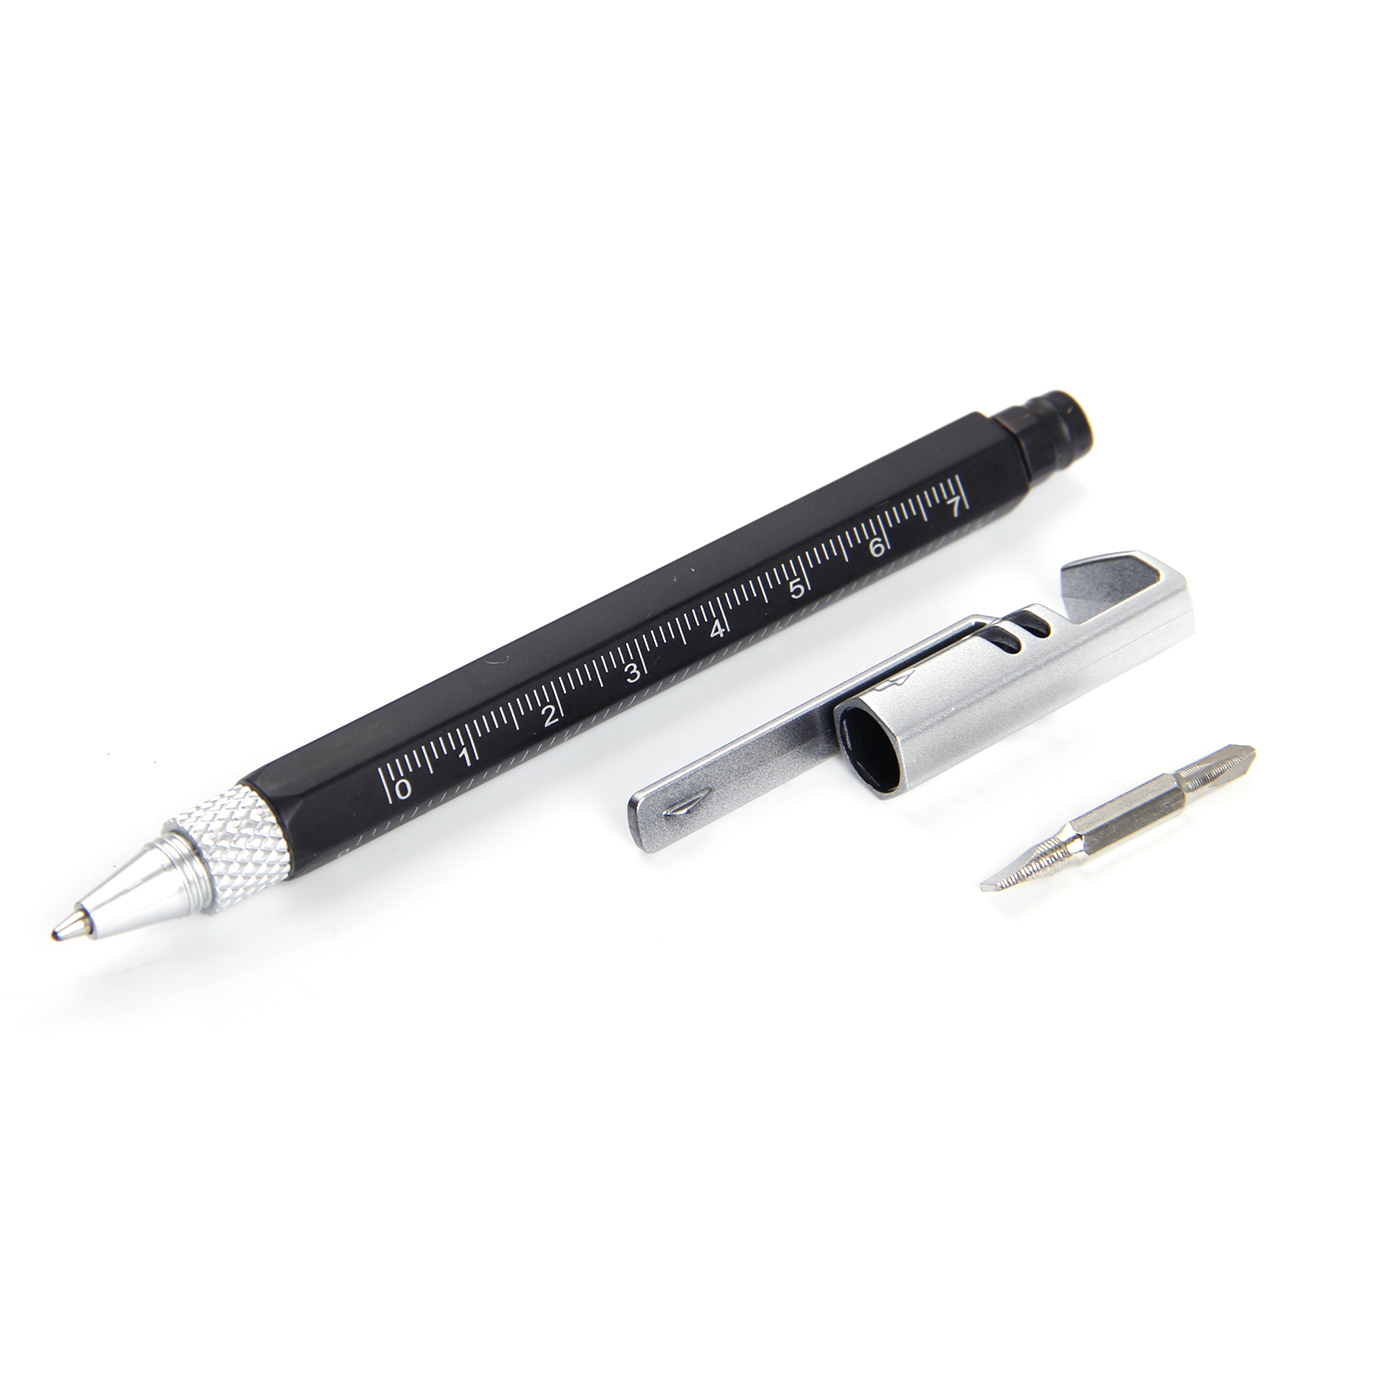 Multifunction Tool Pen With Phone Holder2